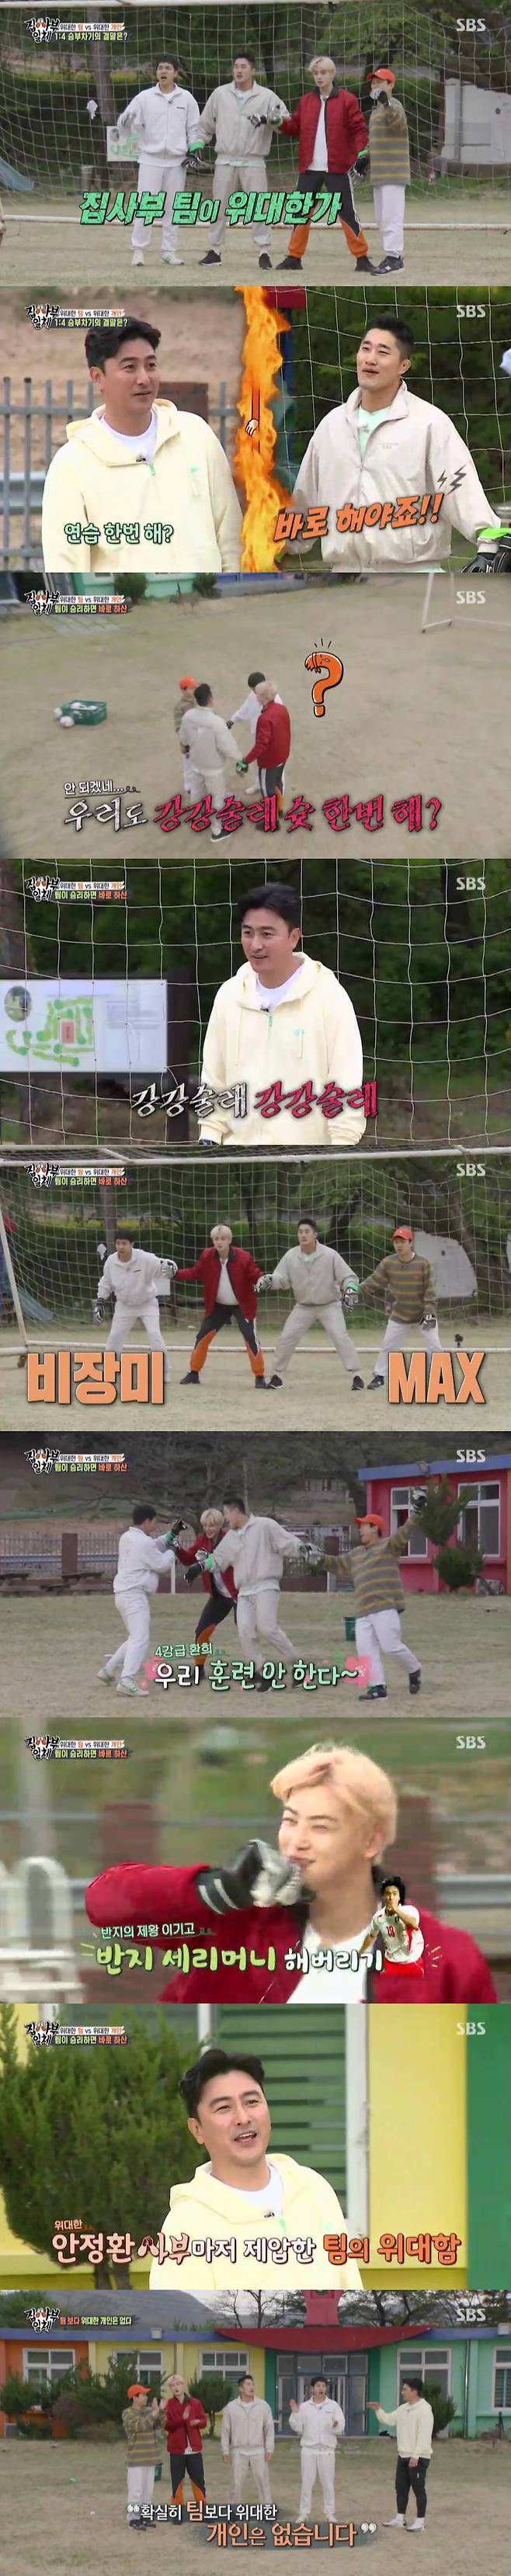 SBS All The Butlers Master Ahn Jung-hwan revealed his teamwork training, which was Initiated by Hiddink during his national team, and he was interested in his future dreams with surprise confessions.According to Nielsen Korea, a ratings agency on the 17th, the ratings of households in the Seoul metropolitan area of SBS All The Butlers, which was broadcast on the 16th, continued to rise to 5.3% in the first part and 6.1% in the second part.The topic and competitiveness index, the 2049 target audience rating, also rose to 3.4%, and the highest audience rating per minute was 7.3%.Master Ahn Jung-hwan prepared for the teamwork training that was initiated by Hiddink during the national team.The members were given a ball to watch, and four people challenged to run in 150m 20 seconds. The members were laughing with their personal play.In addition, Ahn Jung-hwan said, We are so hard, but it seems to have been harder when we were players. Ahn Jung-hwan replied, It was so hard that I had to bury my pants without knowing it.If youre really tough, you hate the director at first, and then youre thinking about it, and youre going to get it, added Ahn Jung-hwan.On the other hand, the members were less physical as the training was repeated, but they were more and more enthusiastic.On this day, Ahn Jung-hwan answered home life is also a teamwork to the members who asked if they think family life is a teamwork.He also expressed his affection for his wife and family, saying, Mrs. Lee (Lee Hye-won) is the leader, and If I was alone, I would have been broken.It was good to be a teamwork at the 2002 World Cup, said Ahn Jung-hwan, who recalled the time. The candidates sitting on the bench are very sick.But no one was impressed and angry, as if they were playing together. He said, Because he sacrificed himself and became a teamwork. Ahn Jung-hwan said, Not only the teamwork of the players but also the teamwork of the red devils were good, he said, the teamwork of the fans and the team, the teamwork of the whole people was good.In particular, Ahn Jung-hwan asked the members who asked for the future direction, saying, I originally intended to broadcast it until next year.I dont know if Im going back to football or studying or continuing to broadcast, but my plan is so, said Ahn Jung-hwan, who surprised everyone on the scene.Ahn Jung-hwan said, I am not better than four people except soccer. He said, I will study for leaders, but I want to learn many things.Members then offered Master Ahn Jung-hwan a one-on-four penalty shoot-out.When the members win, they leave immediately, and when Ahn Jung-hwan wins, they are trained in extreme teamwork. Ahn Jung-hwan expressed confidence that he would I will only kick you with my left foot.However, unlike everyones expectation, the All The Butlers team won a dramatic victory.The members cheered after scoring the winning goal and untied the wristband that tied each other, and Cha Eun-woo followed Ahn Jung-hwans ring ceremony and laughed.Ahn Jung-hwan, who watched this, praised the teamwork of the members, saying, There is no greater individual than the team, he said. The most teamwork in Korean entertainment is not good.On the other hand, the members who were delighted like the actual game after the All The Butlers team scored the winning goal on the day laughed and won the best one minute with 7.3% of the audience rating per minute.=